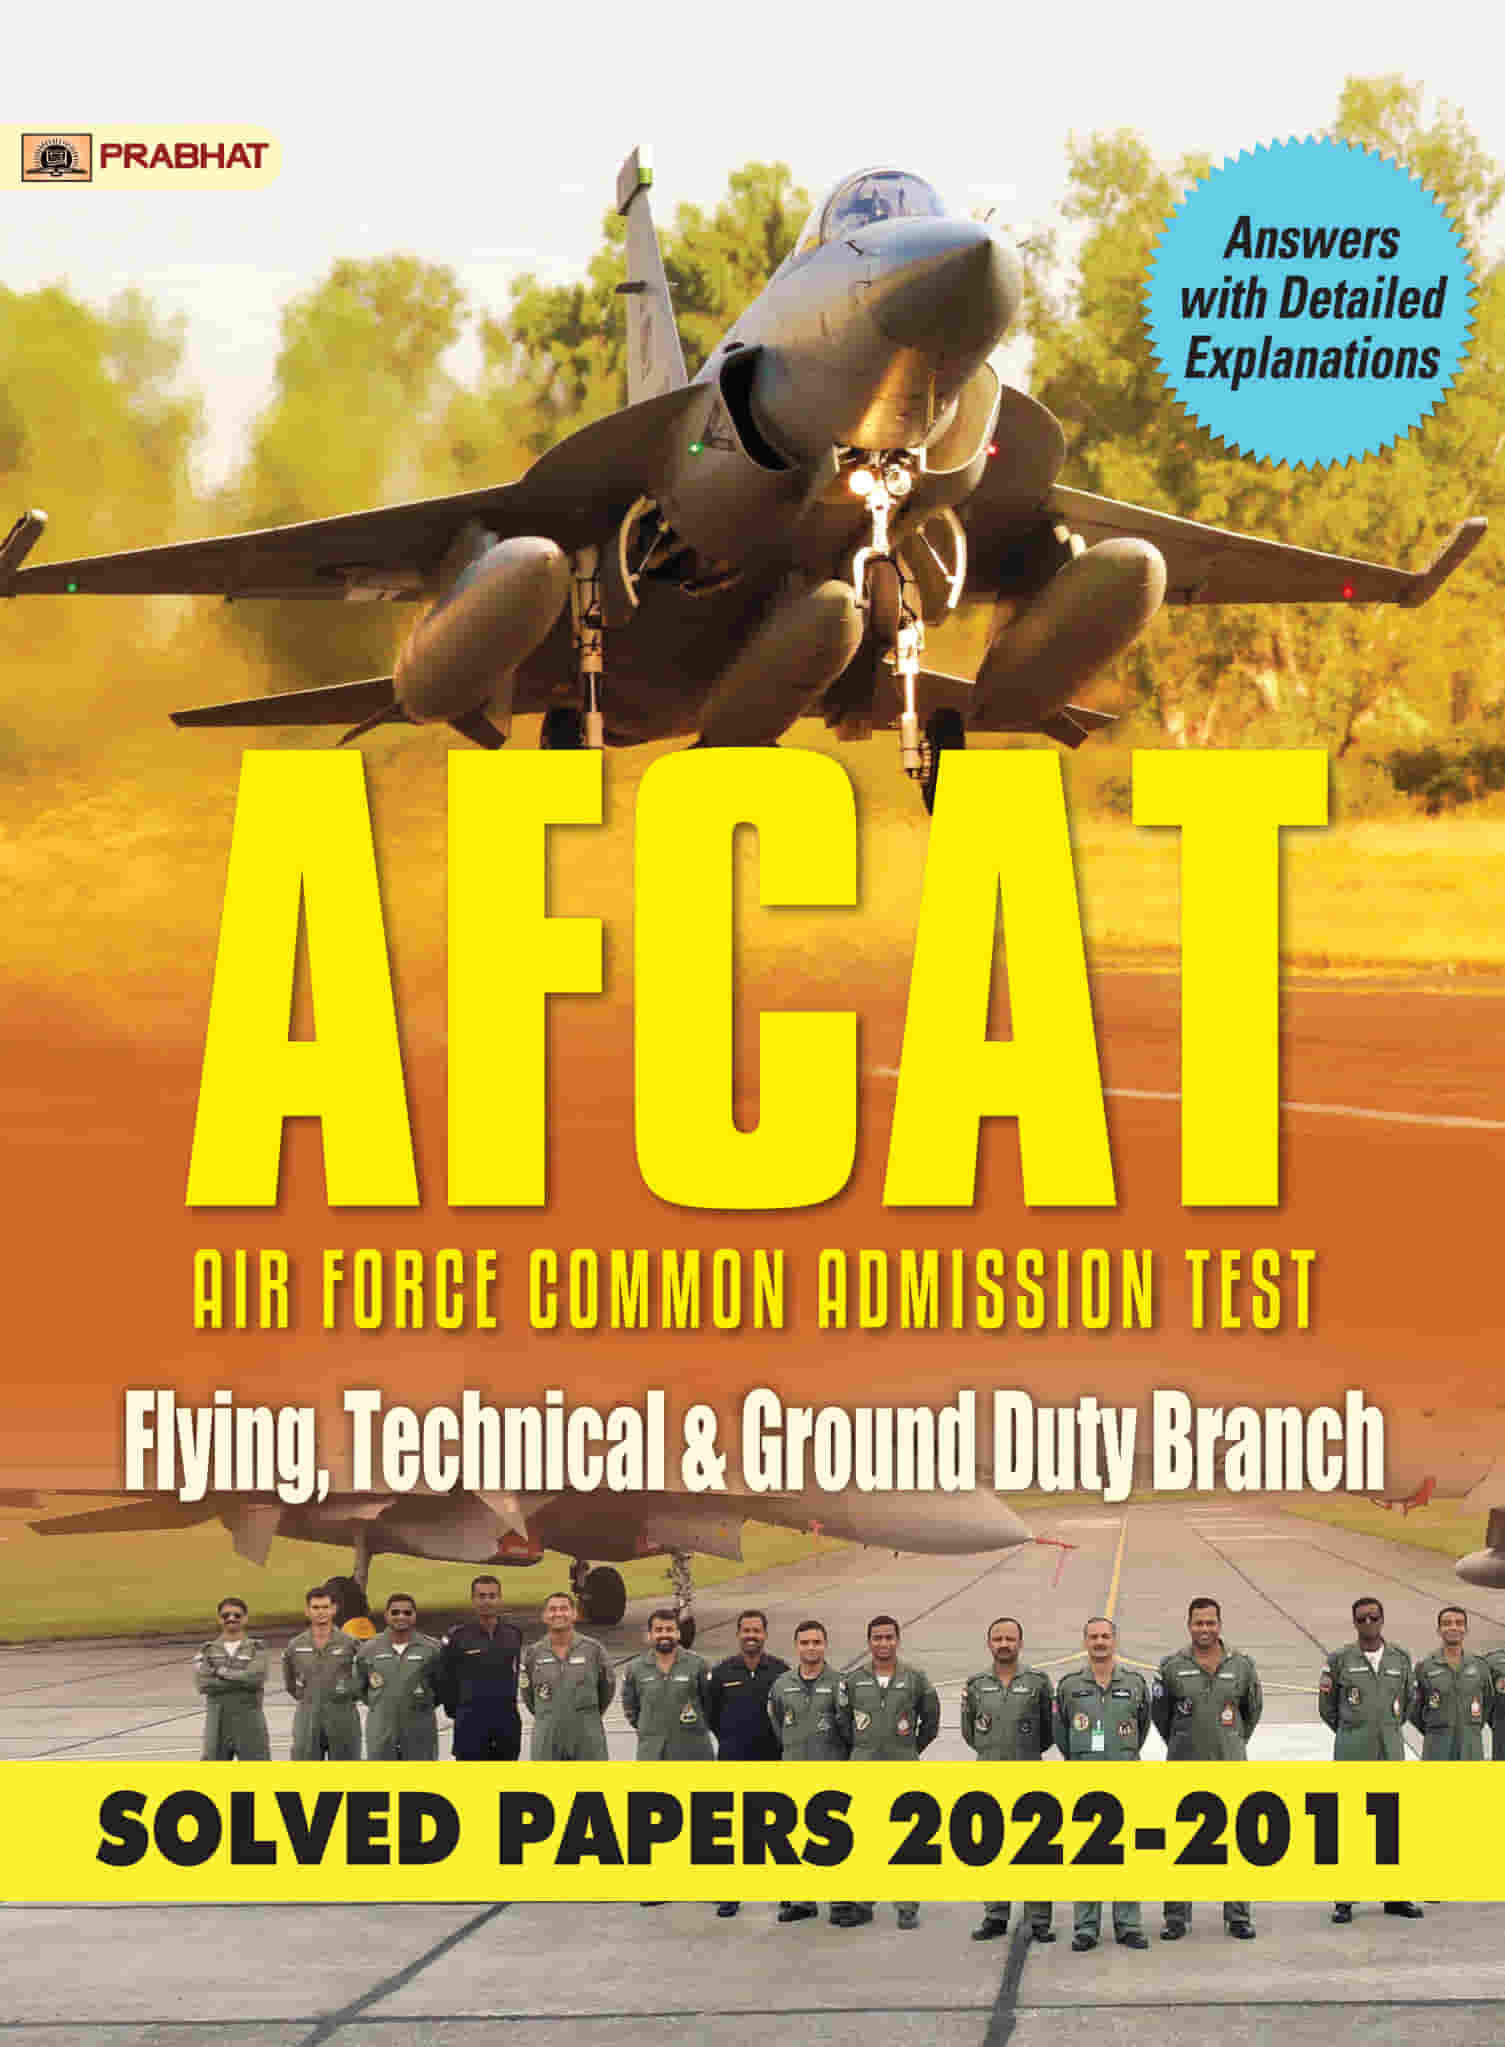 AFCAT Air Force Common Admission Test Flying, Technical & Ground Duty Branch Solved Papers 2022-2011 